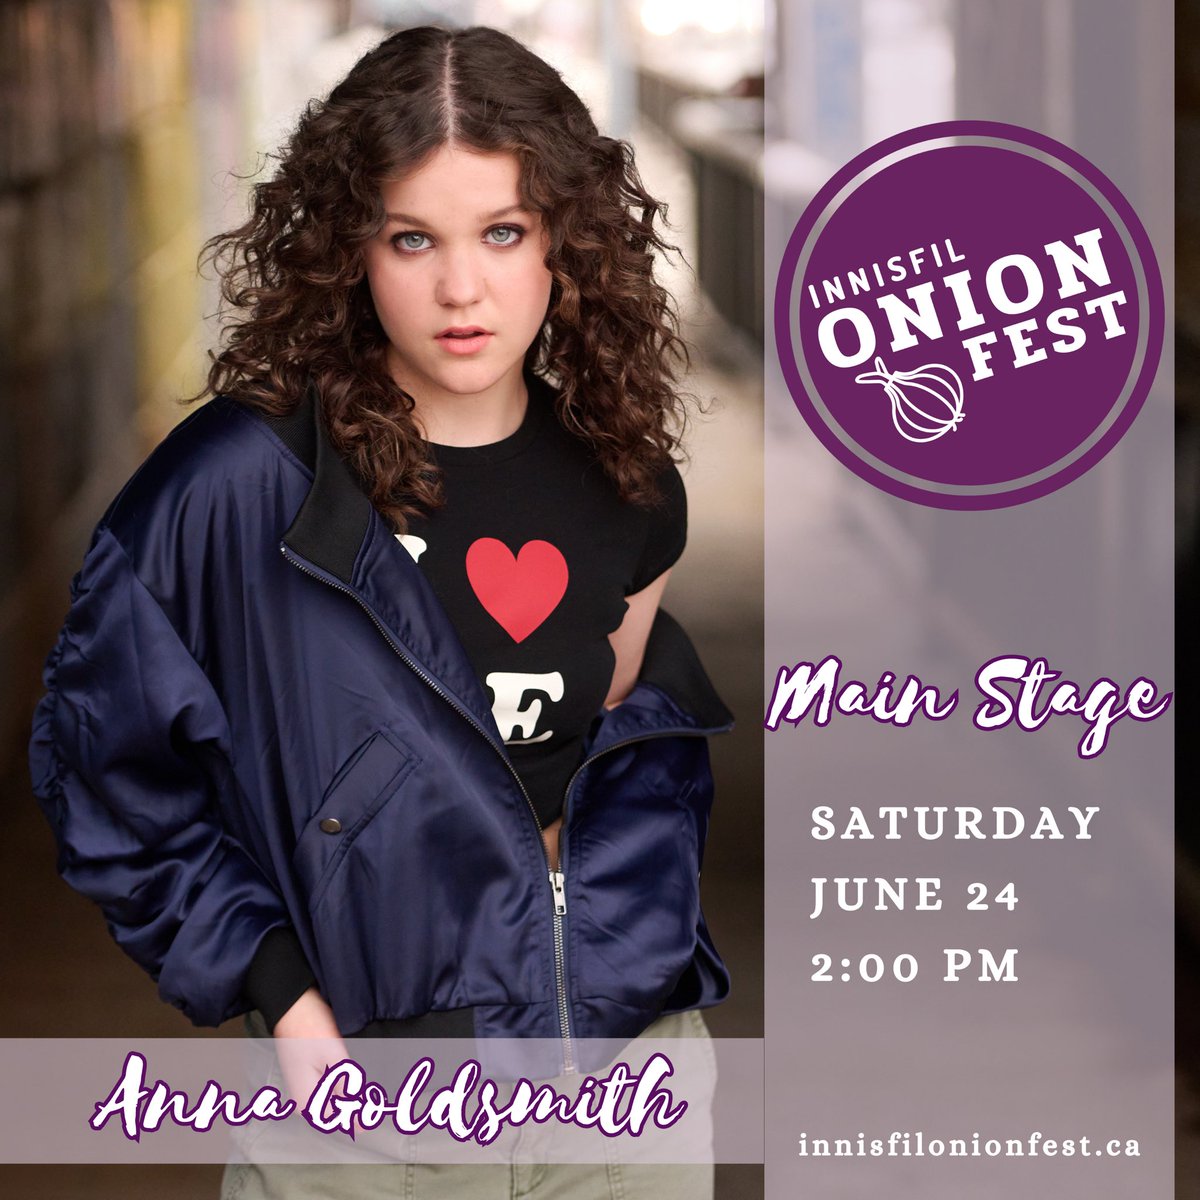 I am so pumped to take the stage on Saturday. I have perfected my Setlist, and it is going to be rockin’!!! #musician #unsignedartist #singersongwriter #annagoldsmith #girlsrock #indierockmusic #rockstar #curlyhair #emergingartist #canadianmusicscene #canadiancreatives #onionfest